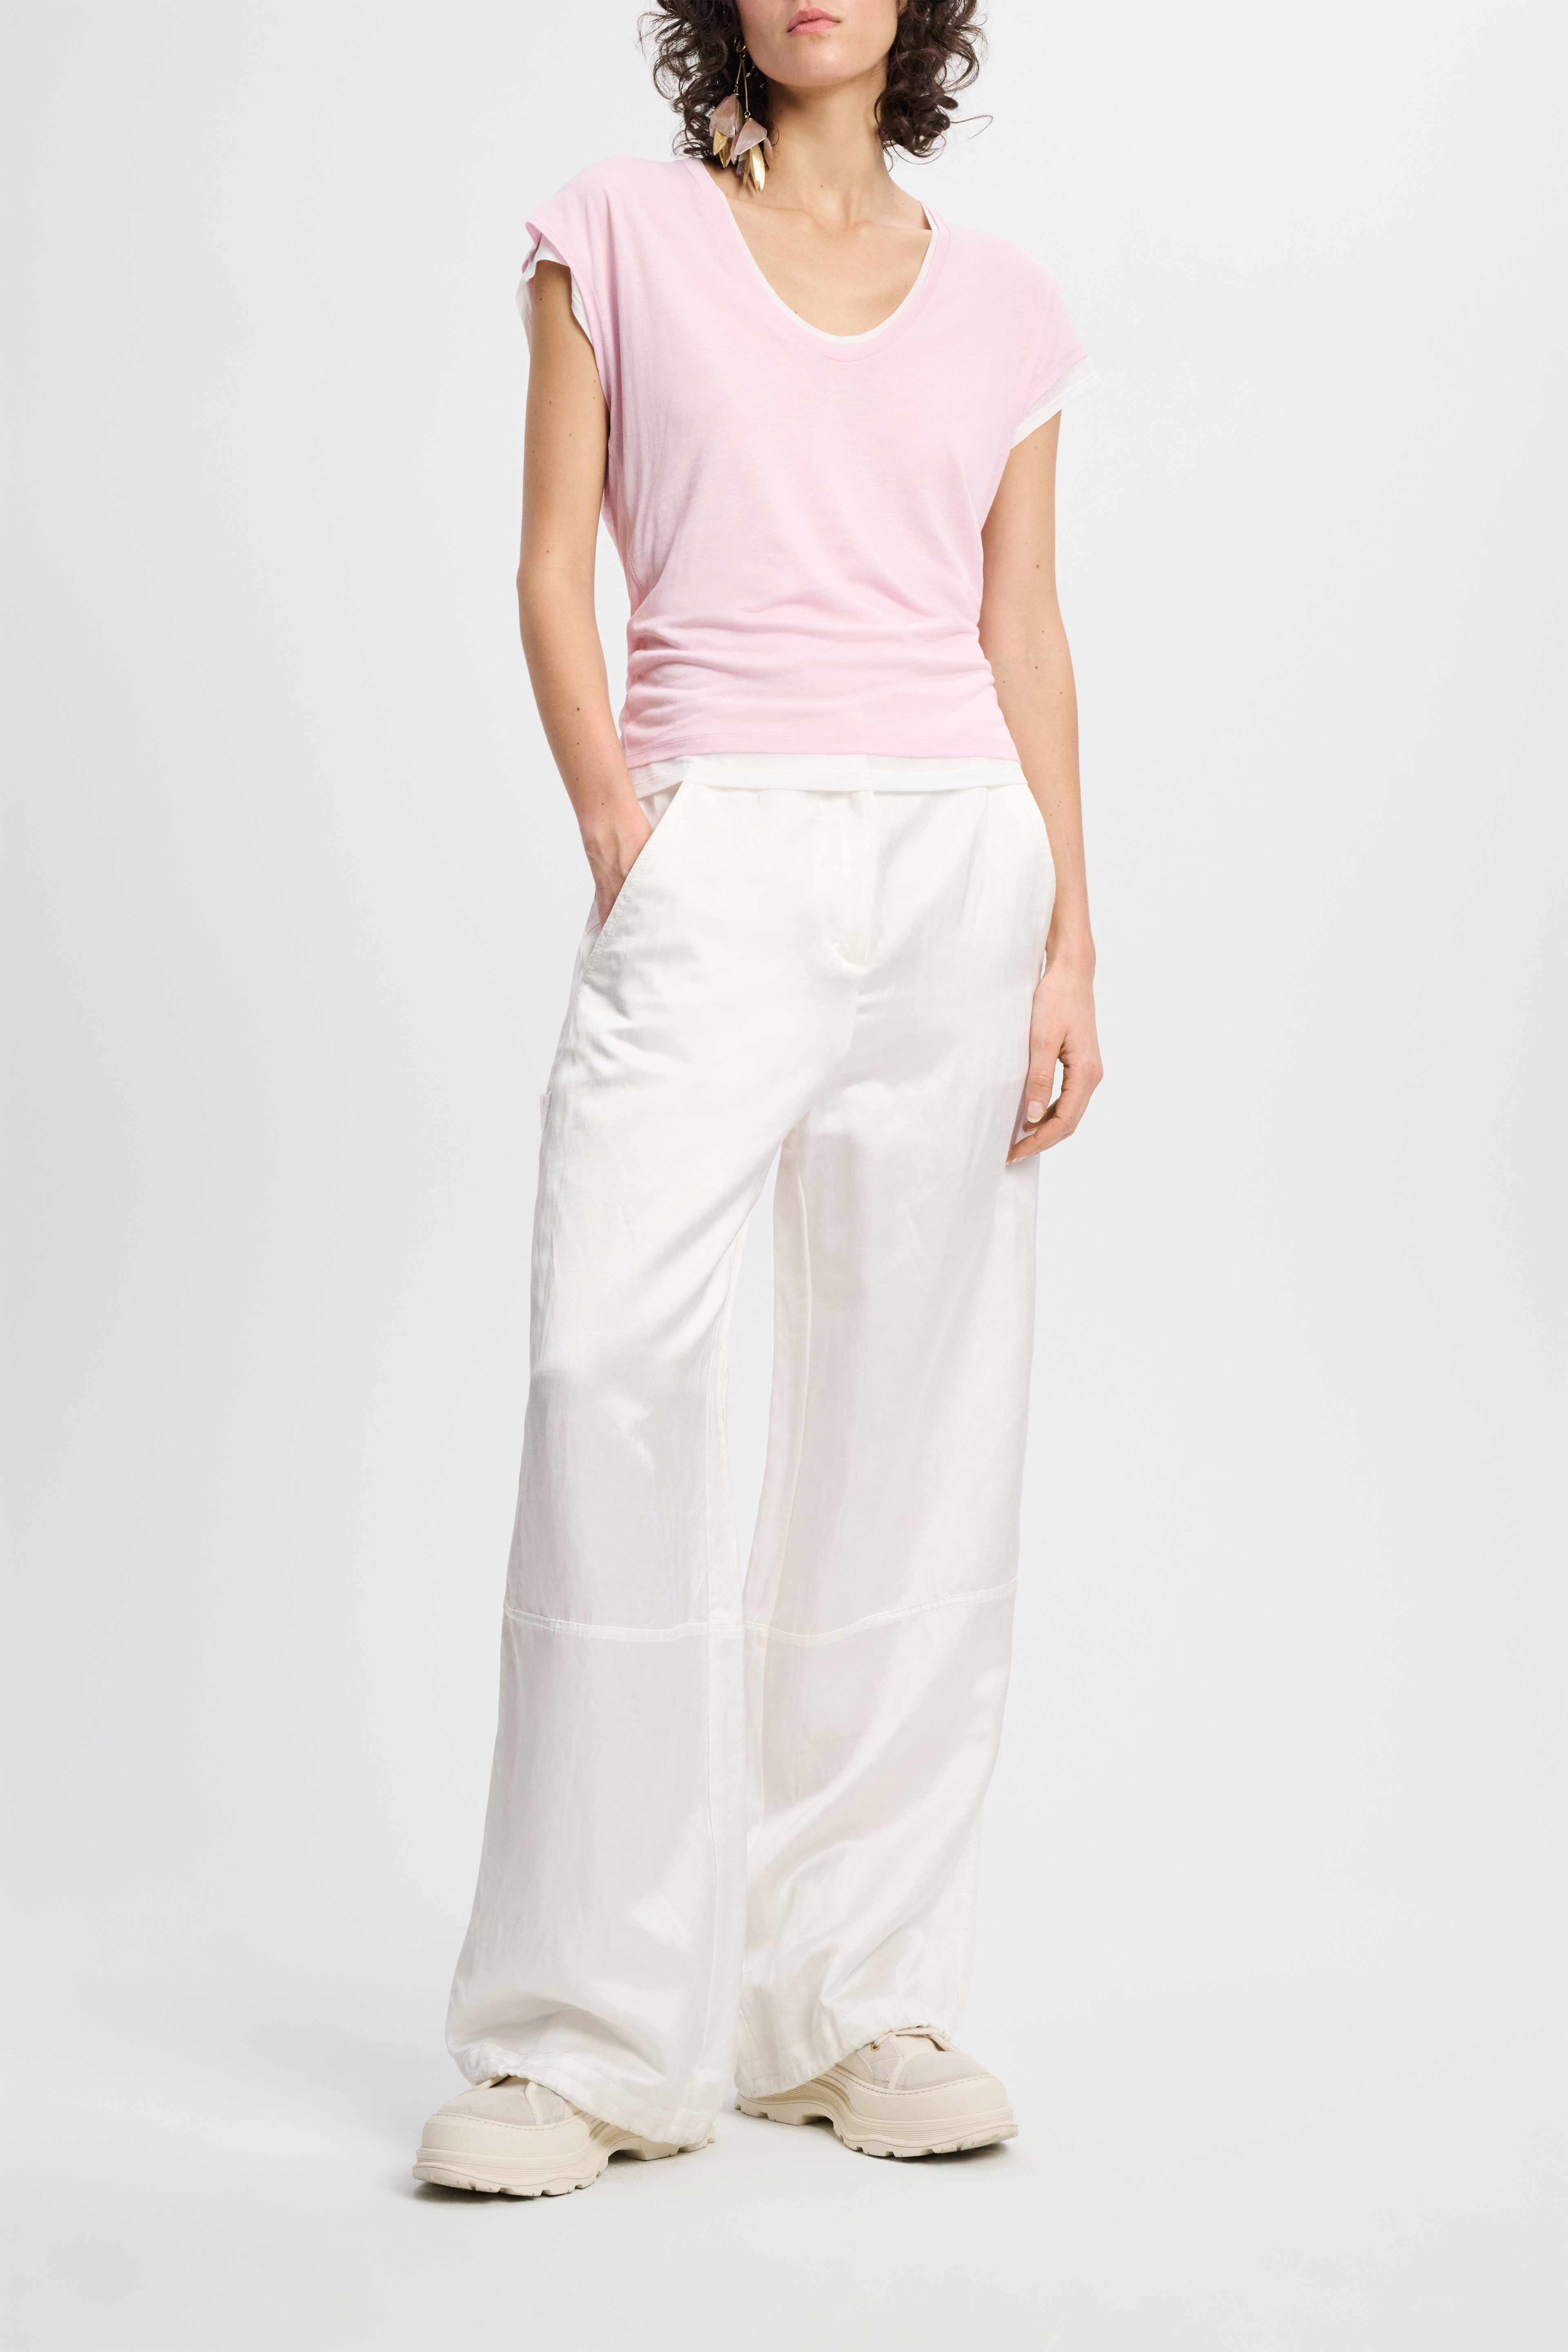 Dorothee Schumacher Double-layer sleeveless top with draped